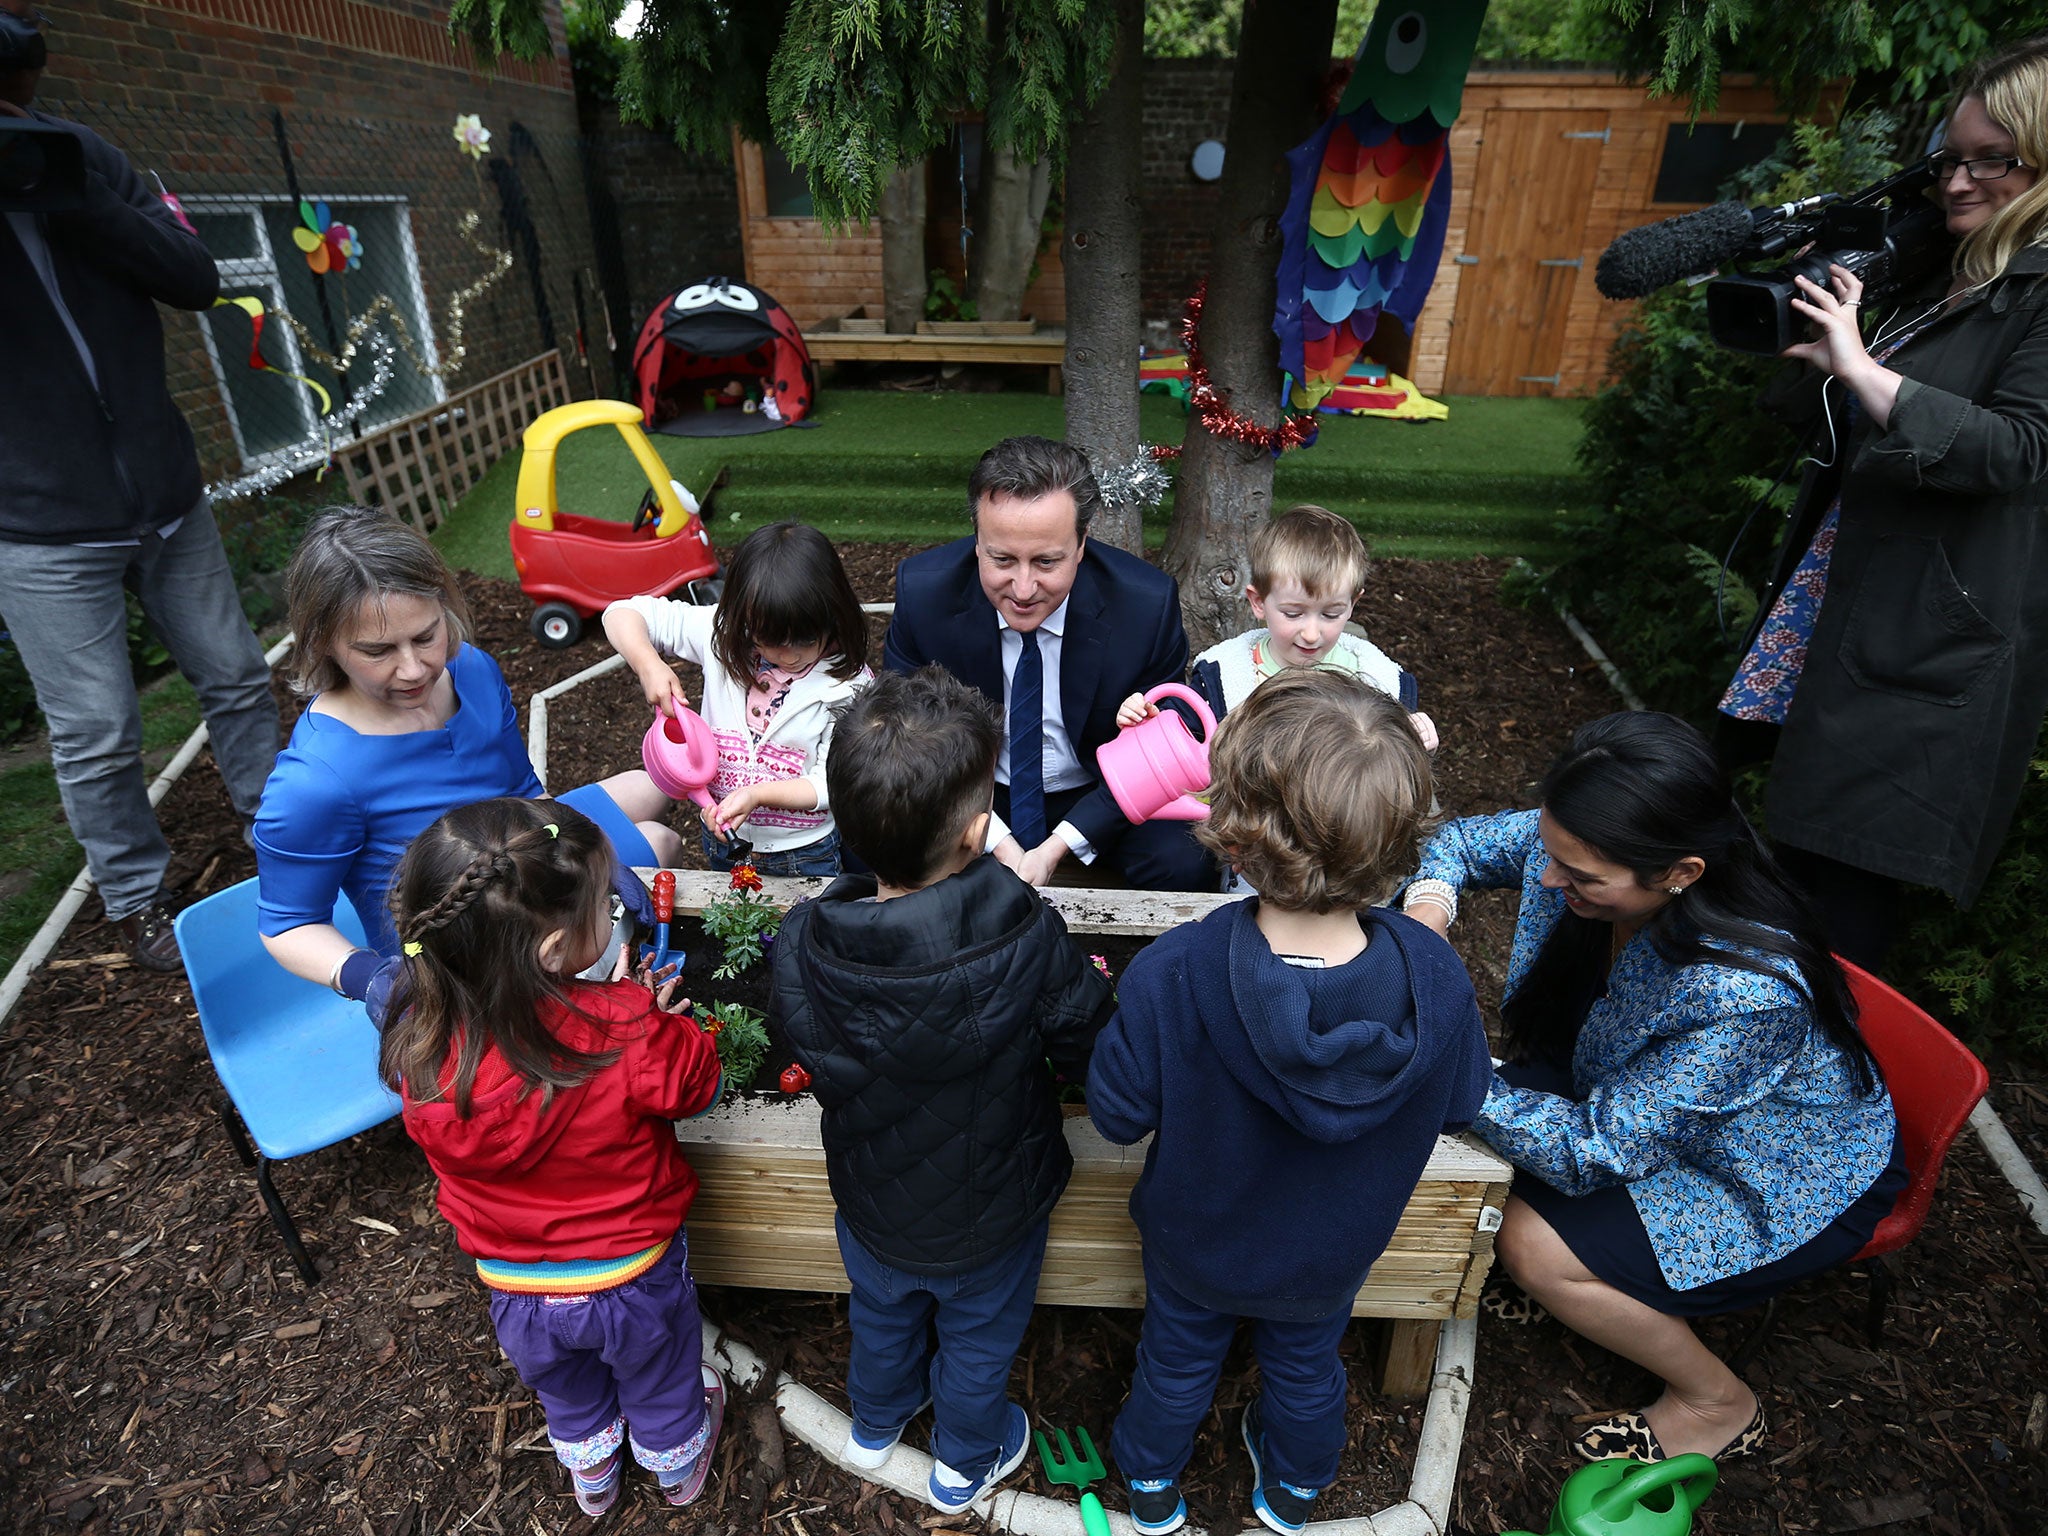 David Cameron plants flowers with children during a visit to a nursery. The new Childcare Bill will see childcare allowances double for parents with a household income of less than £150,000